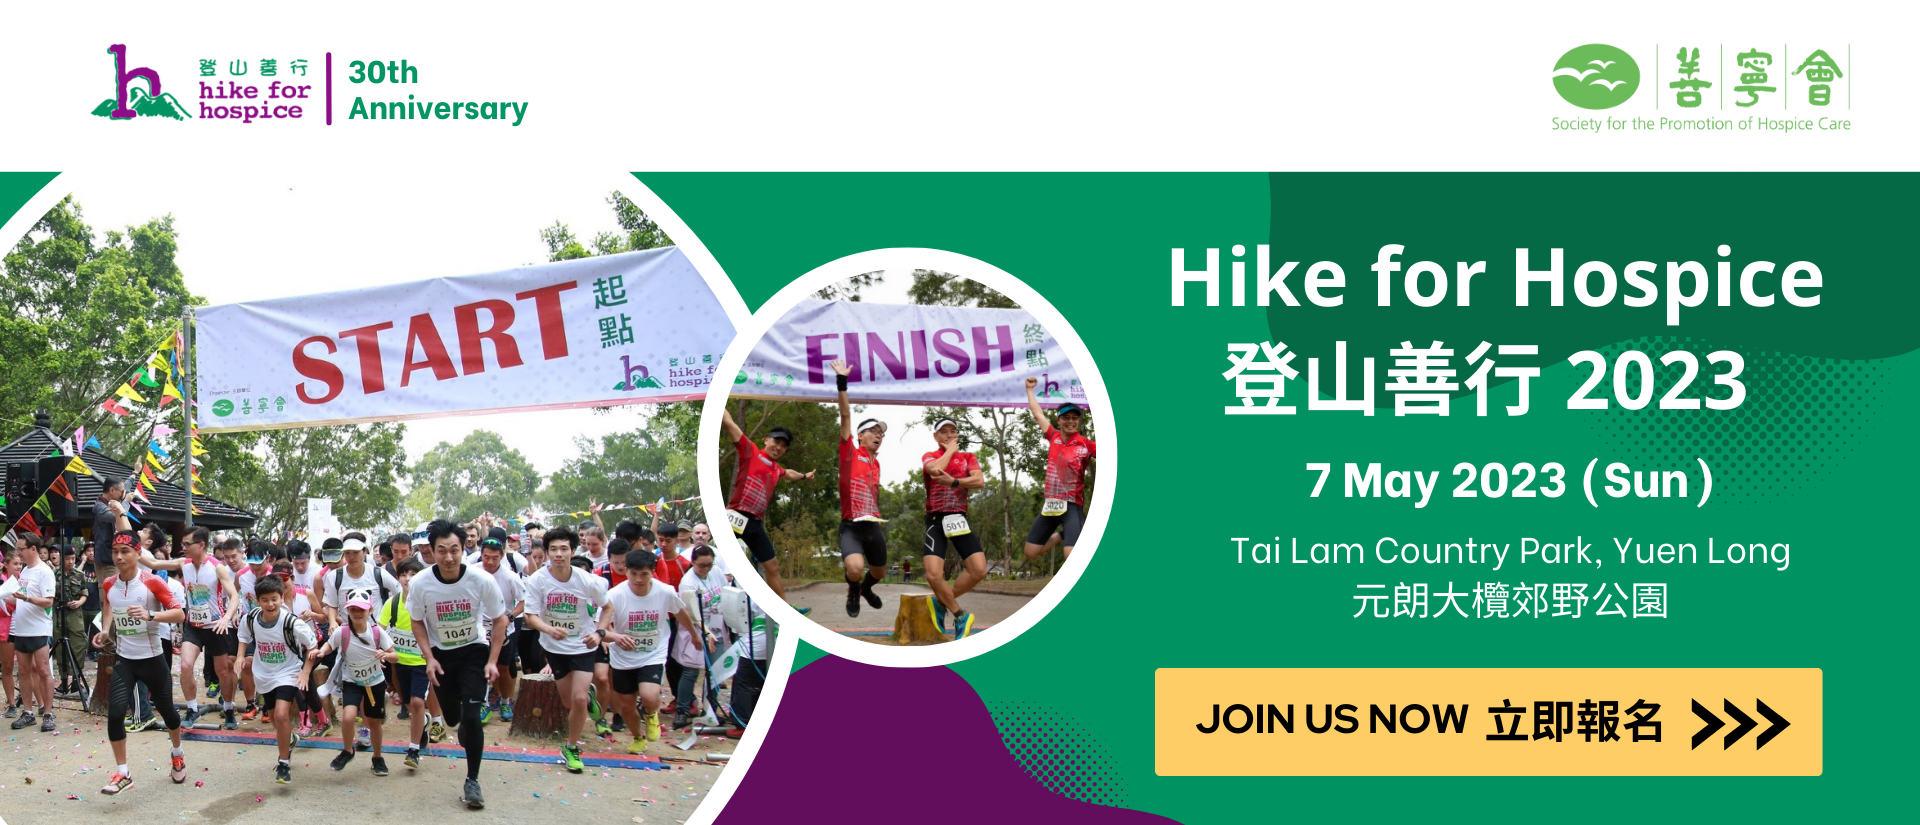 Hike for Hospice 2023